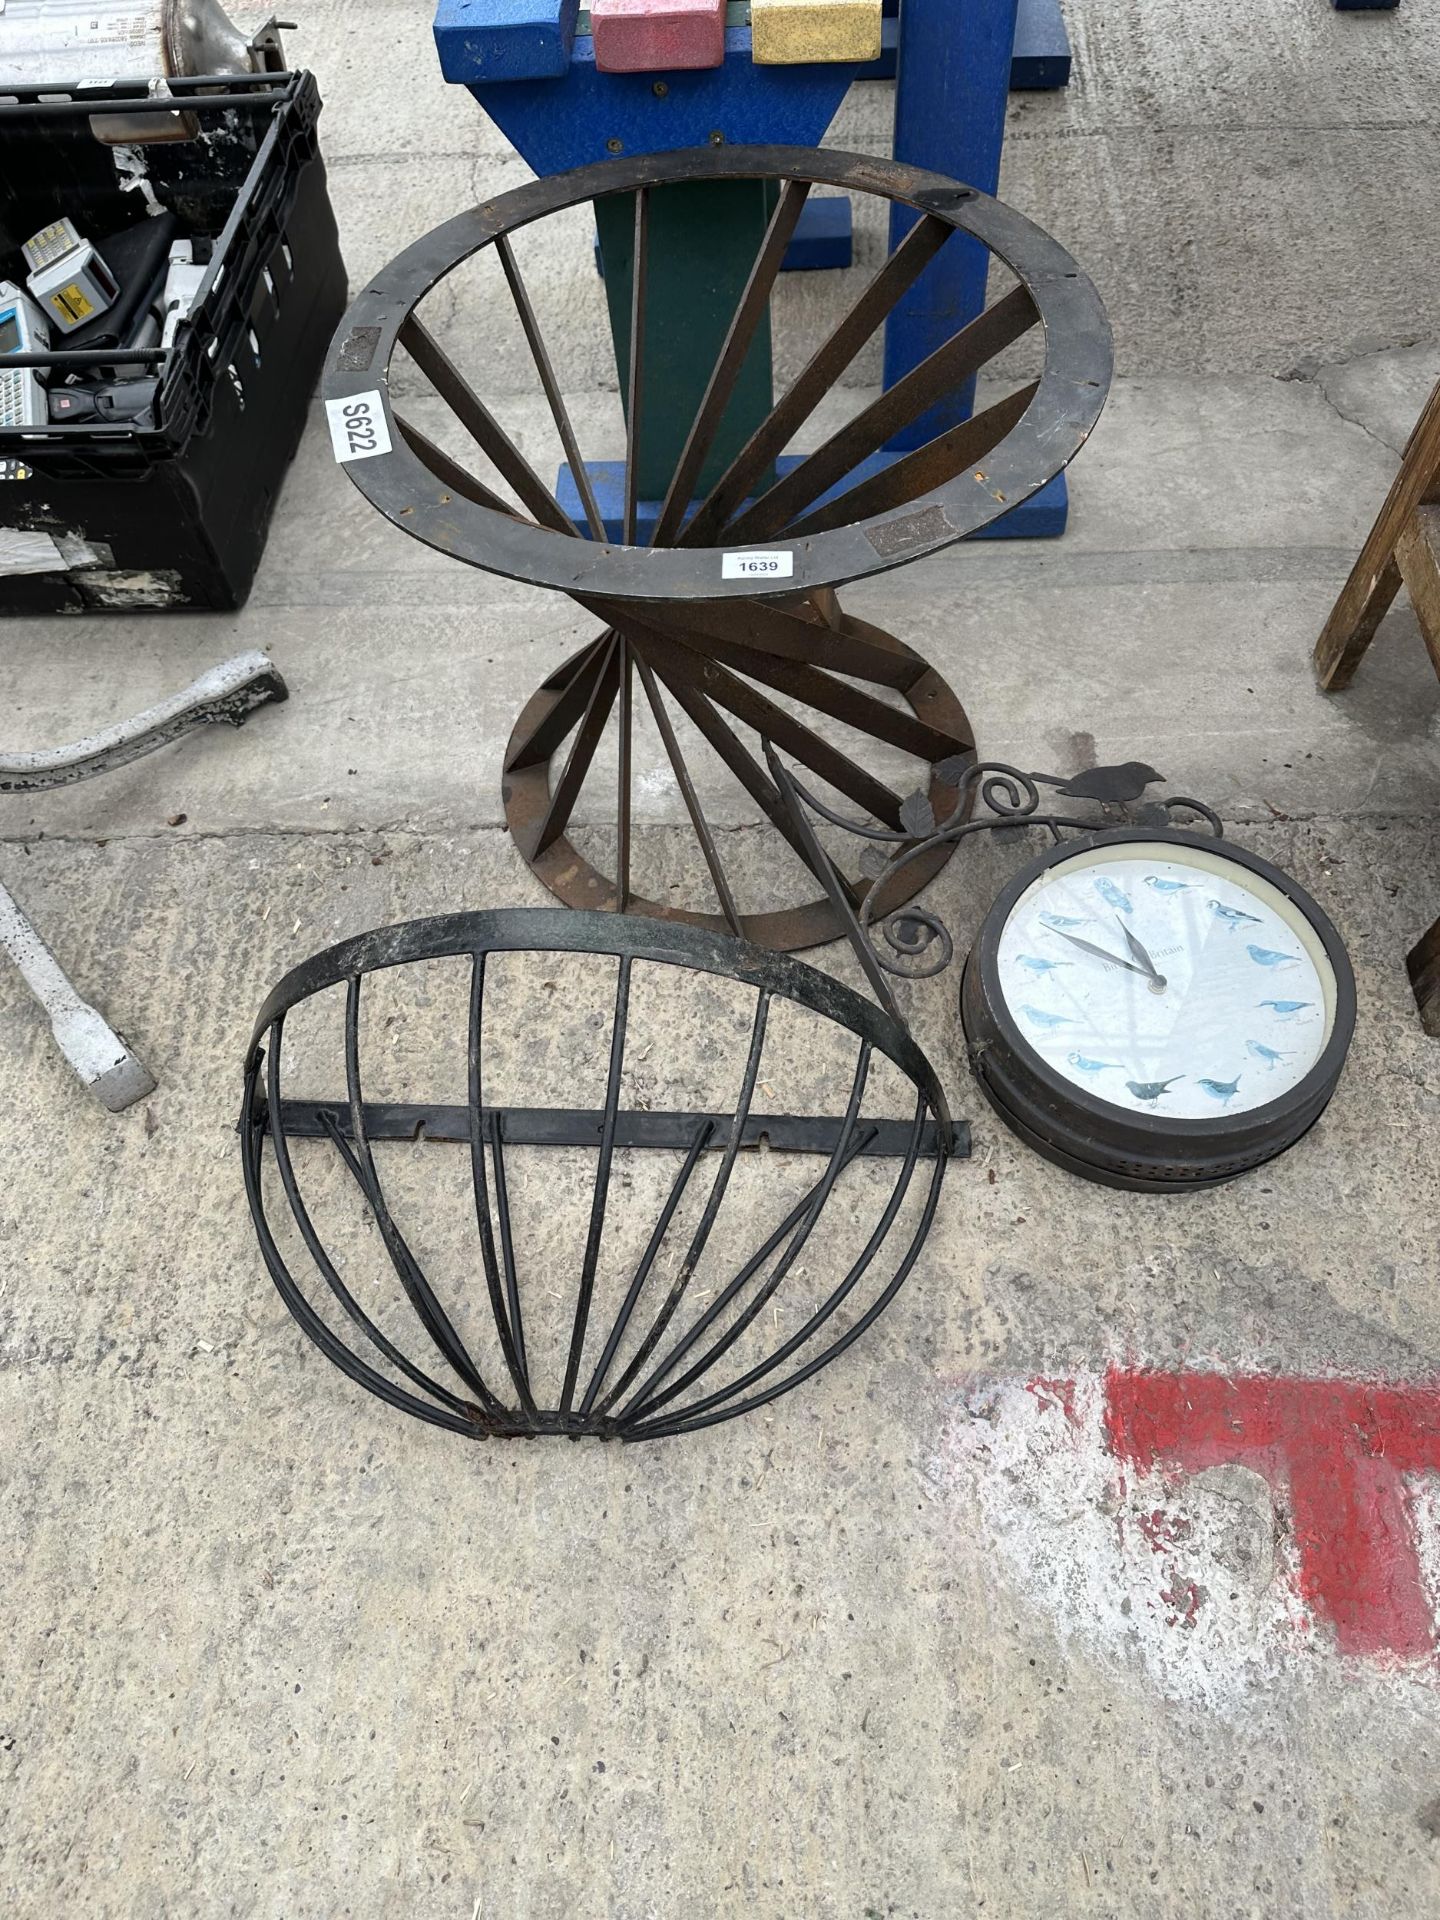 AN OUTDOOR CLOCK, A HAYRACK PLANTER AND A FURTHER METAL TABLE BASE